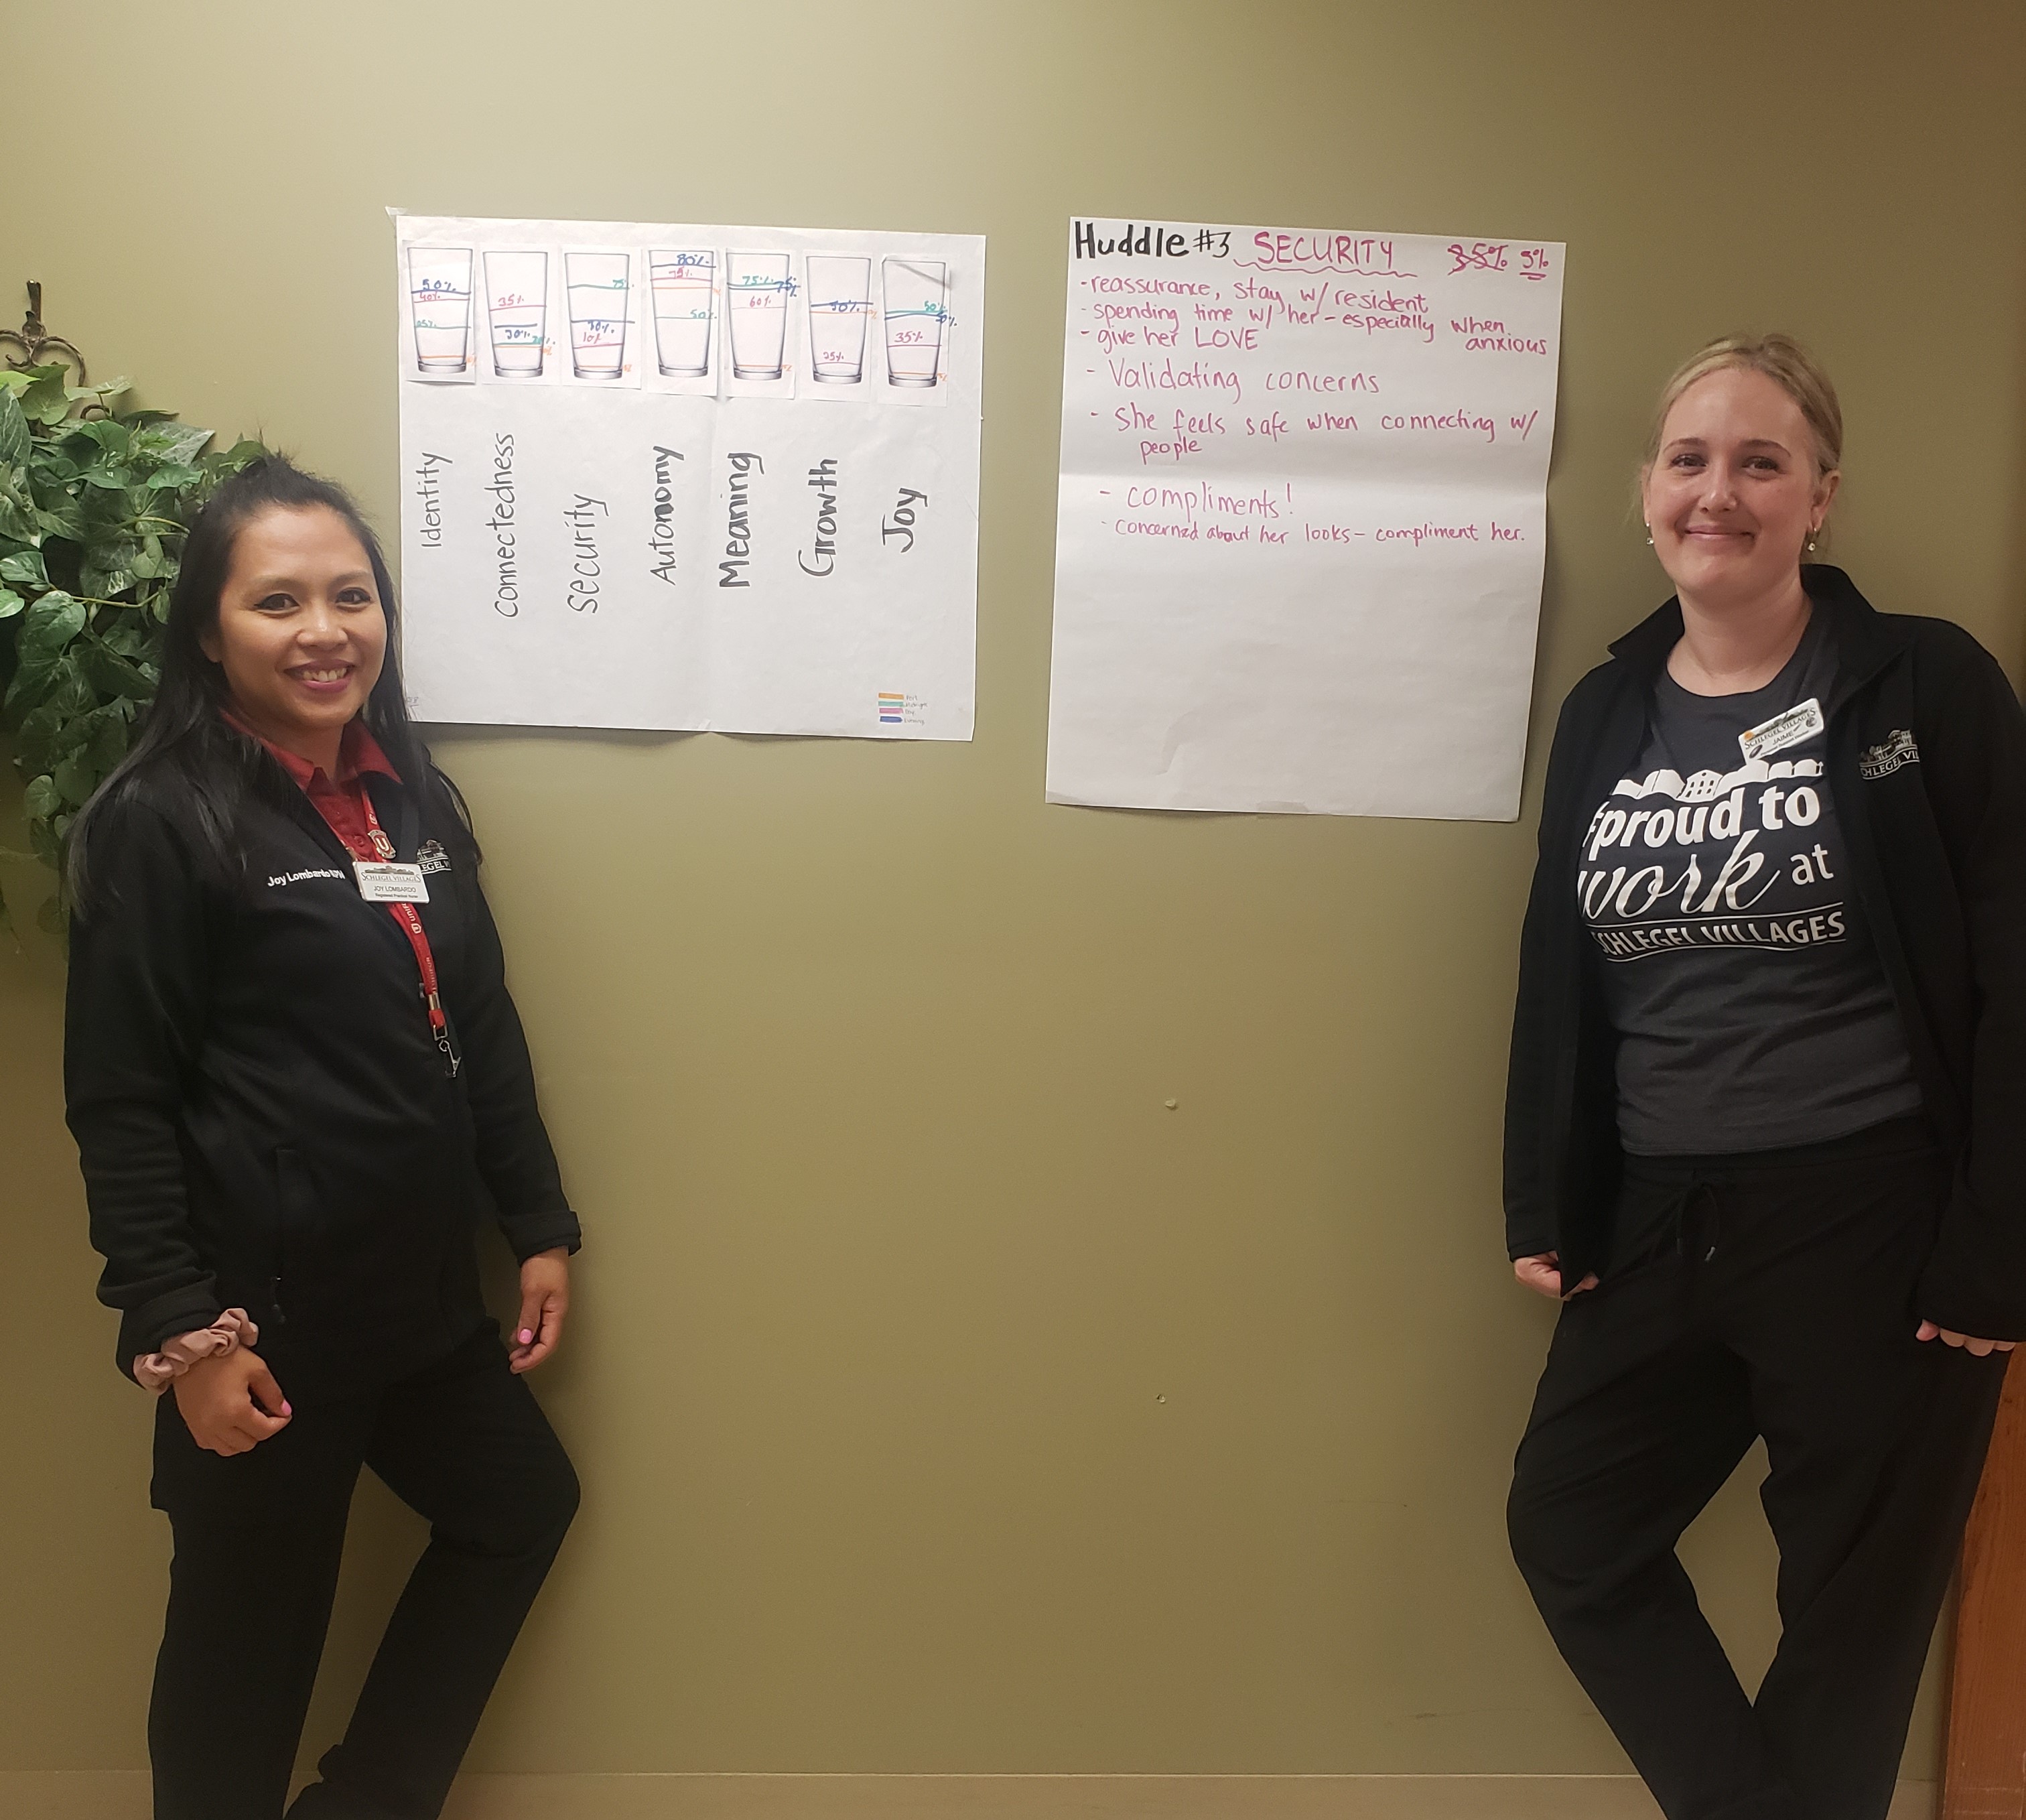 Team Members standing with educational materials on the wall.